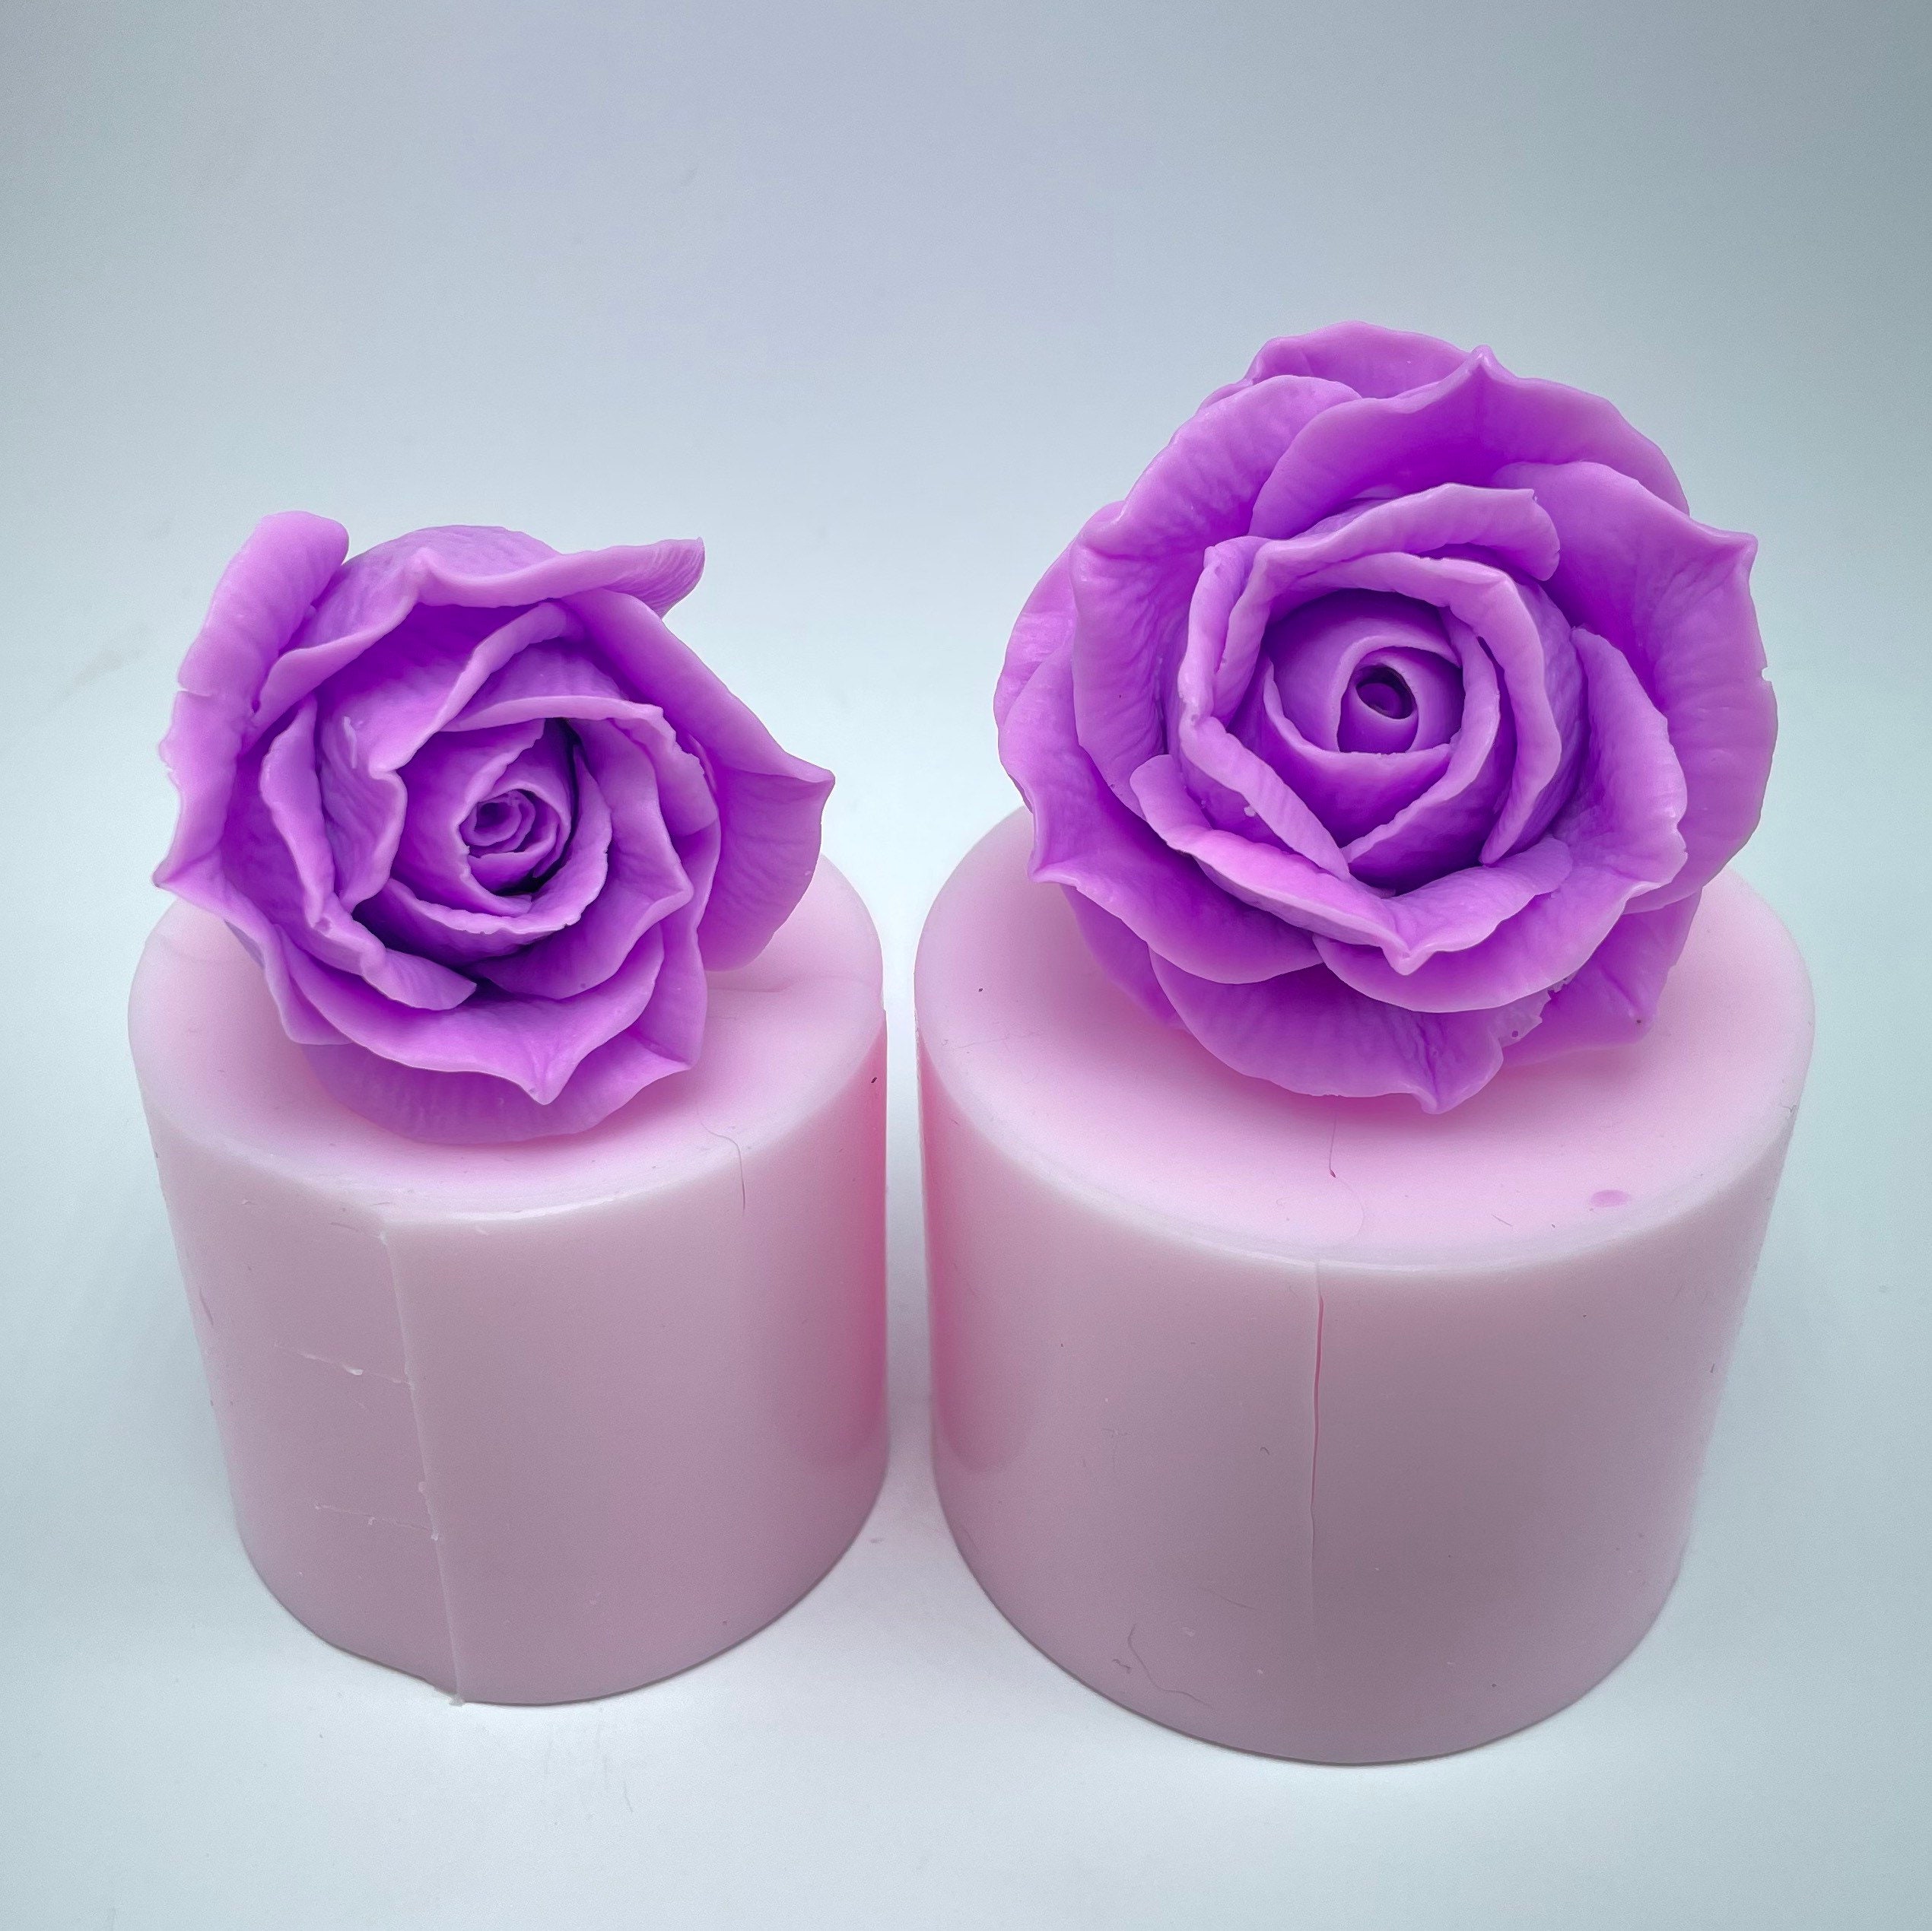 3D Rose Silicone Molds 2PCS Big Rose Resin Candle Mold Bloom Flower Silicone  Fondant Mold for Handmade Chocolate Candy Cake Dessert Soap Wax Candle  Polymer Clay Art Craft 2 Rose